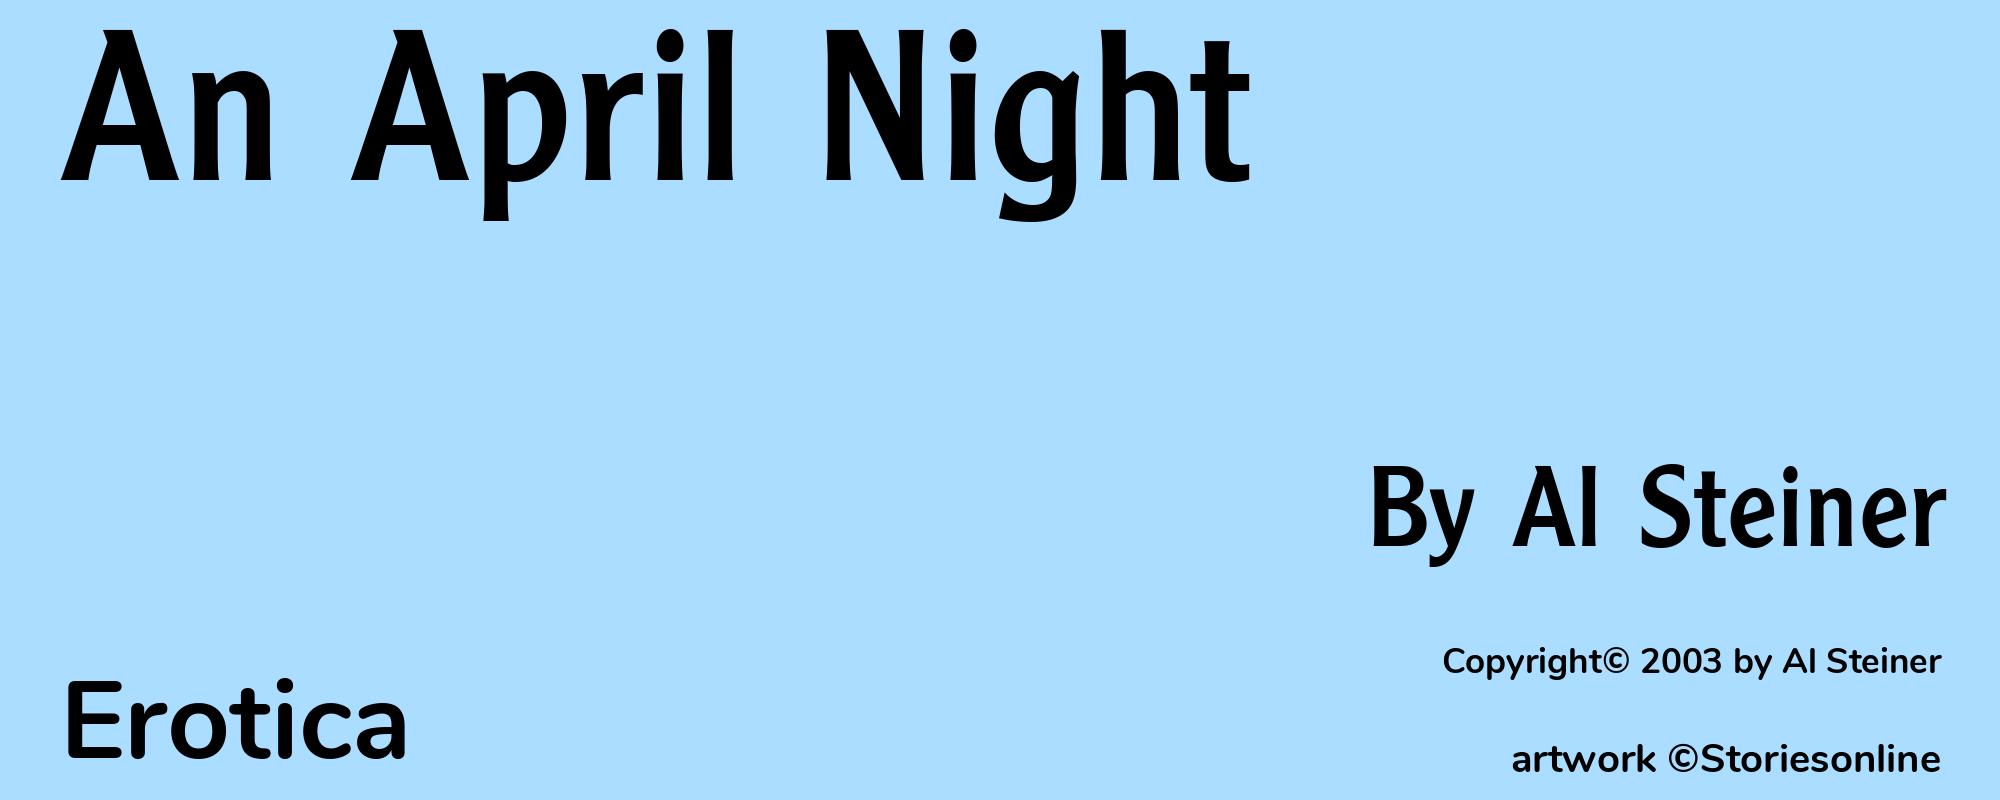 An April Night - Cover